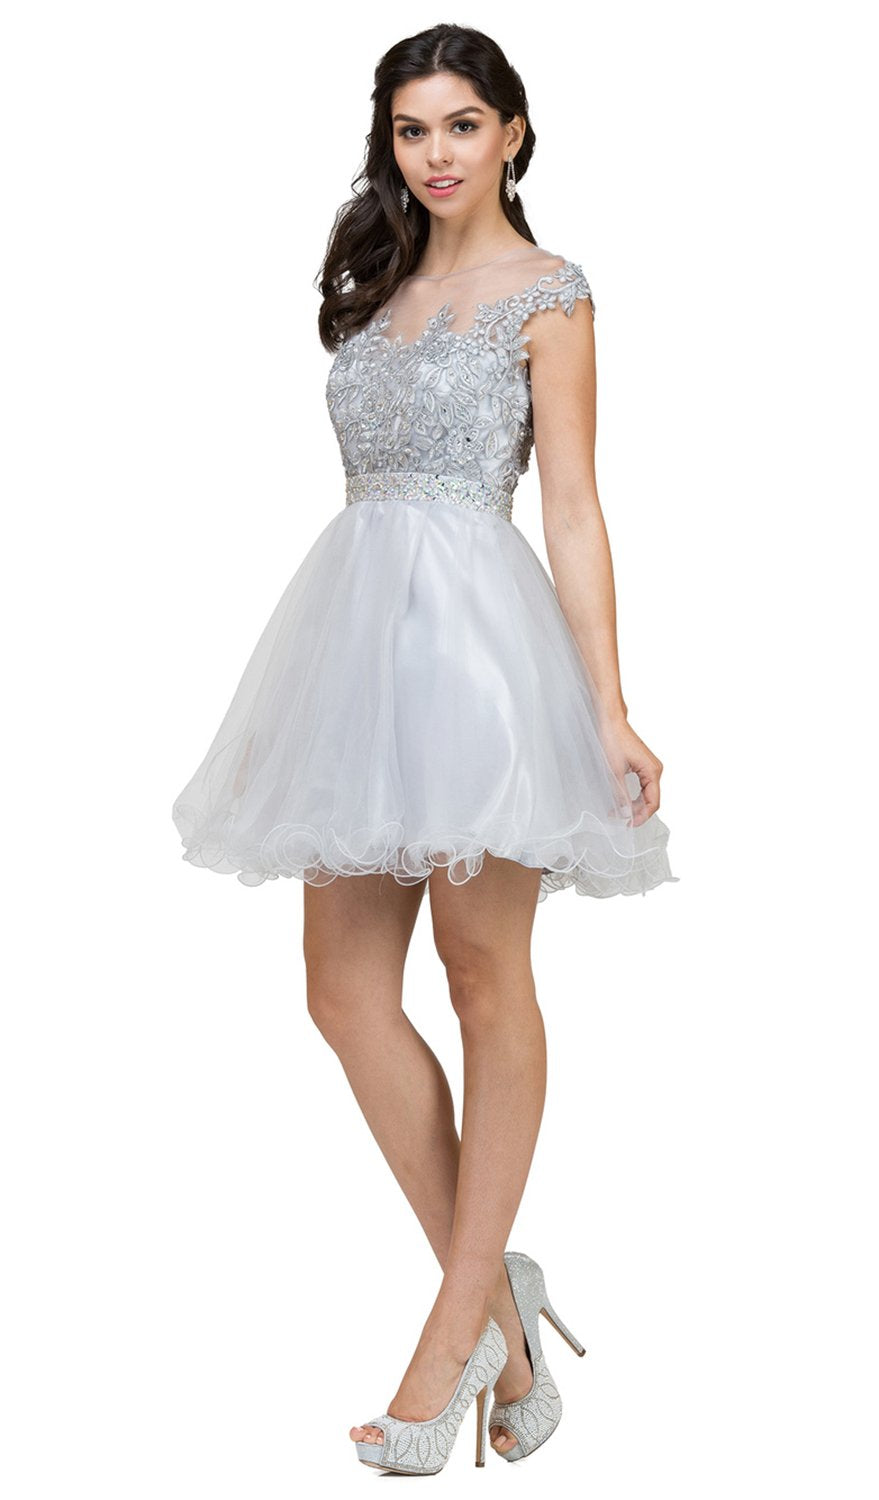 Dancing Queen - 9489 Lace Applique A-line Cocktail Dress In Silver